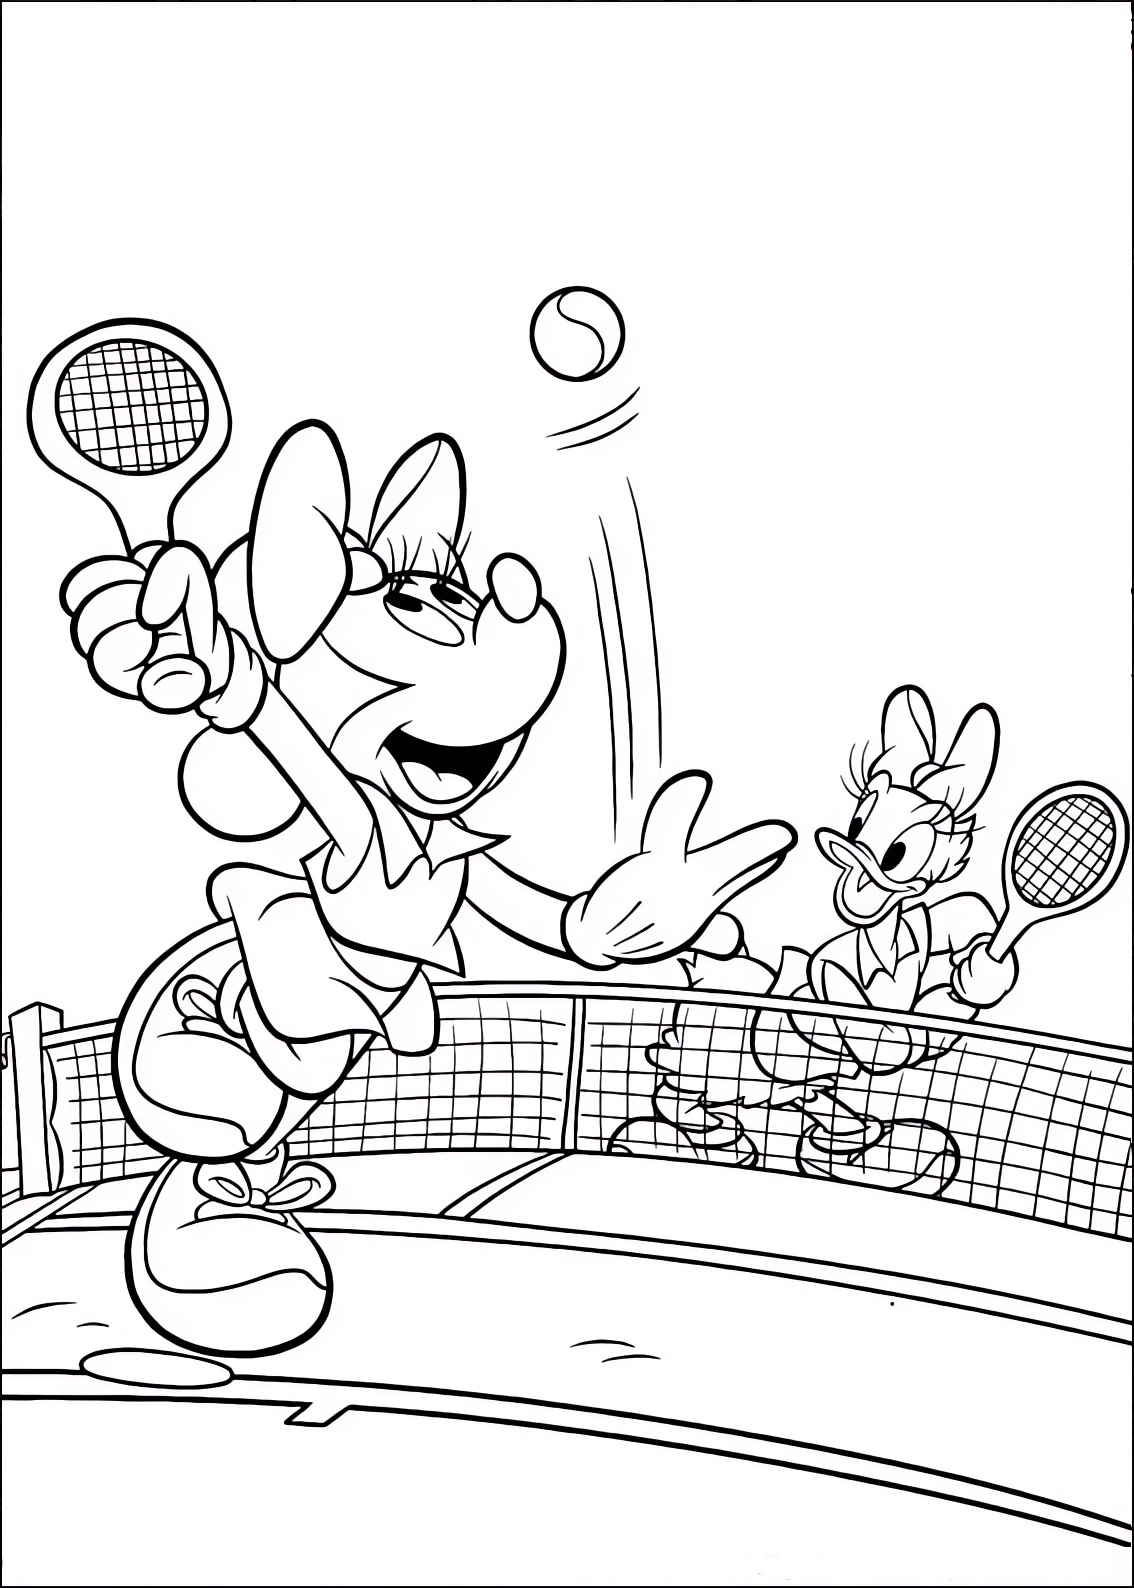 Coloring page of Minnie Mouse and Daisy Duck playing tennis